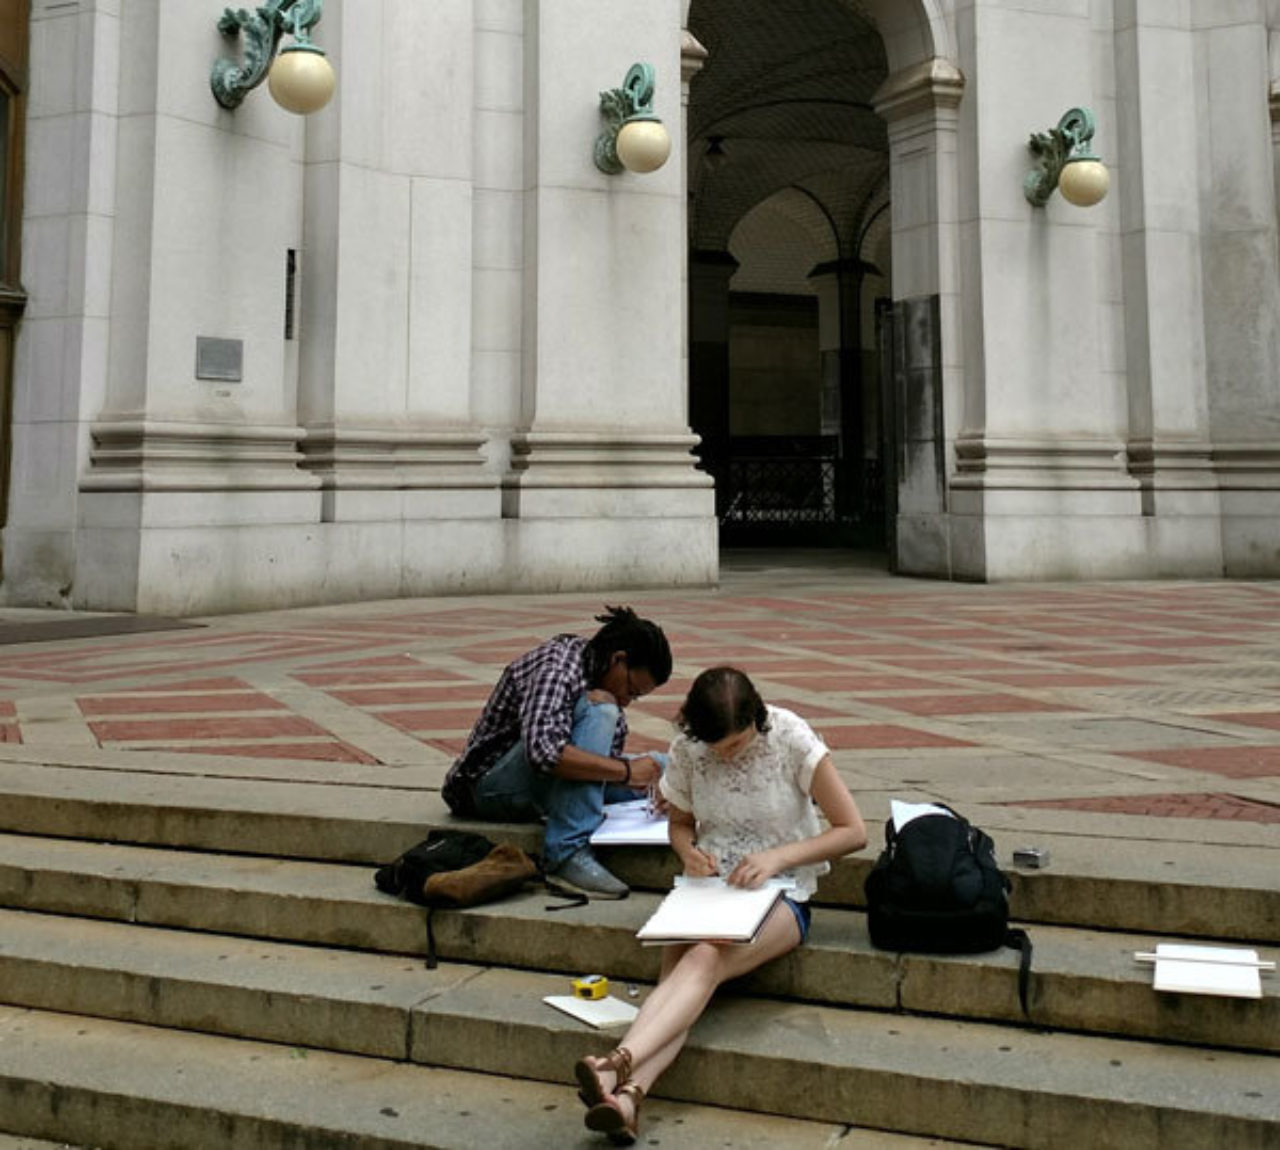 Summer Studio students sketch on location at the Manhattan Municipal Building